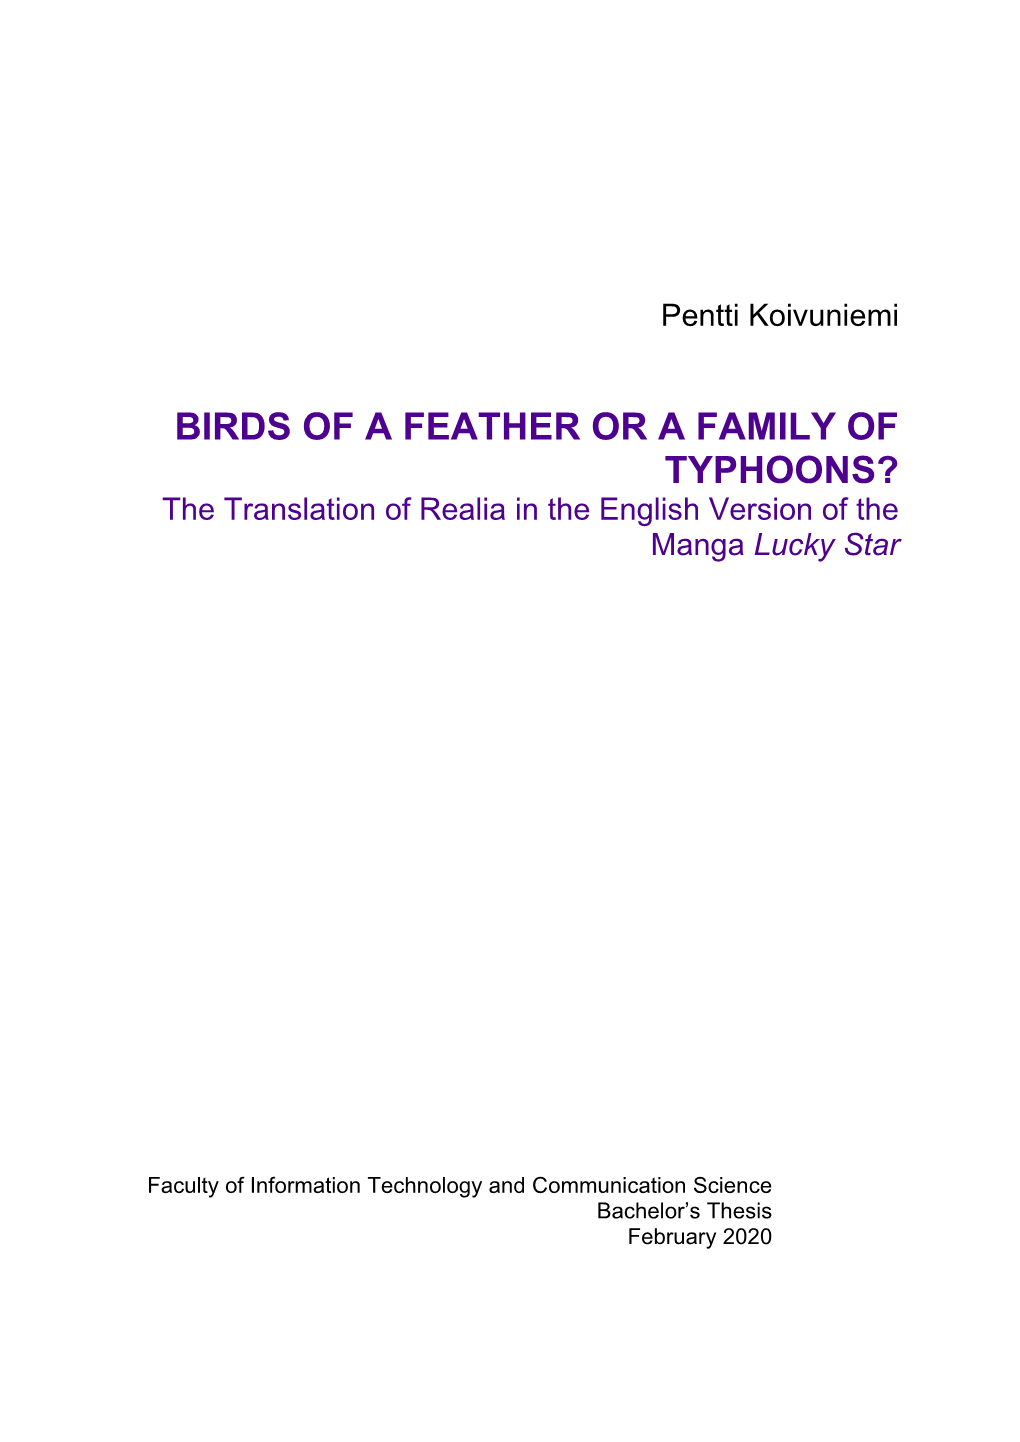 BIRDS of a FEATHER OR a FAMILY of TYPHOONS? the Translation of Realia in the English Version of the Manga Lucky Star